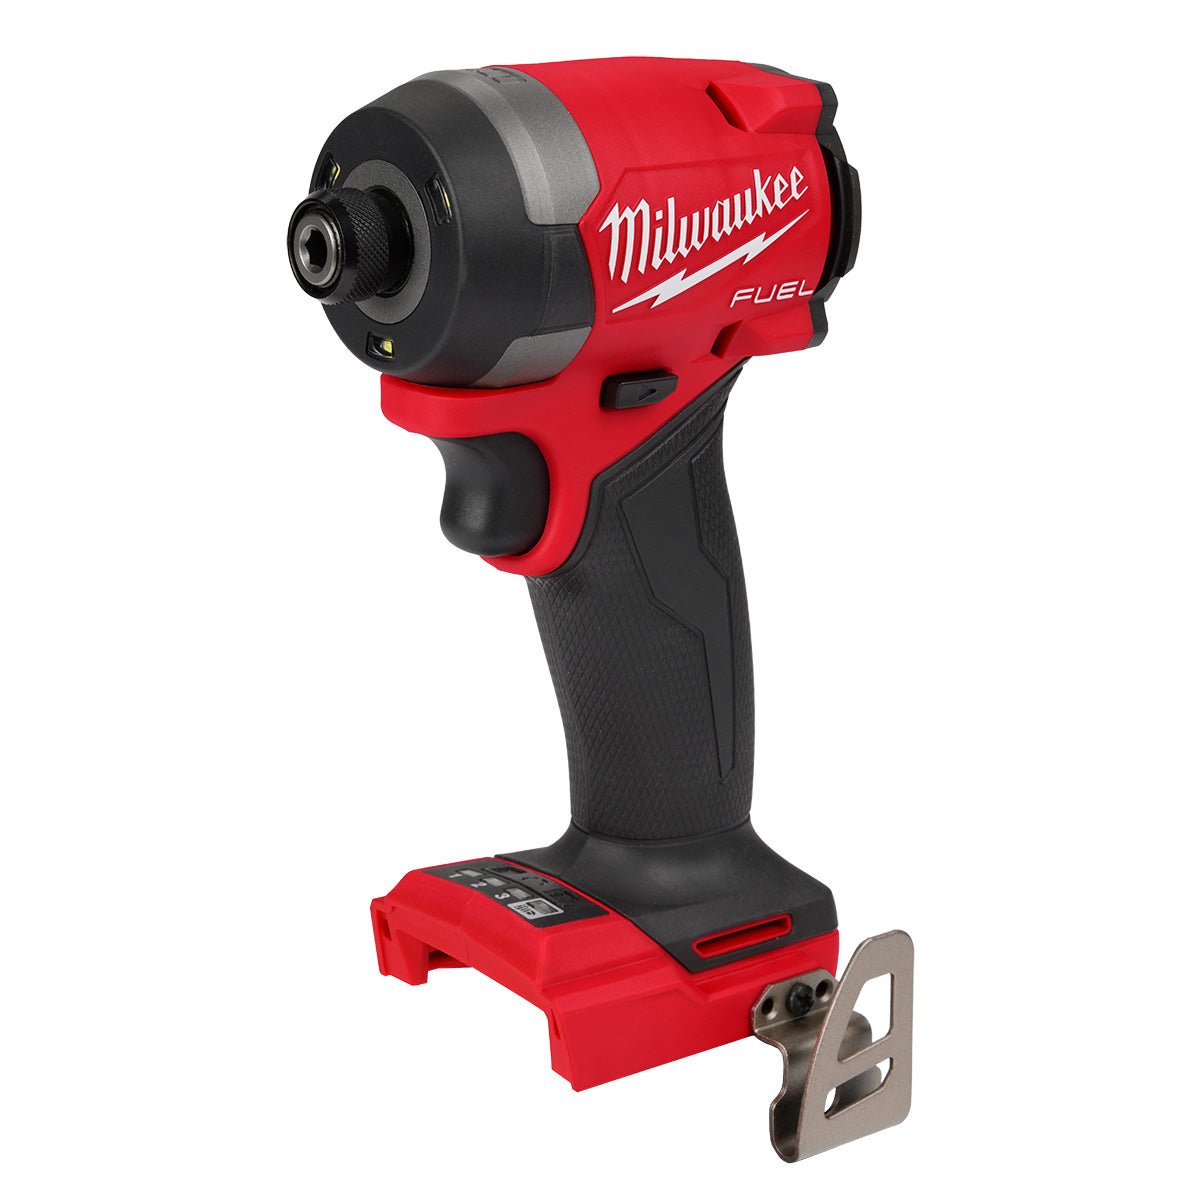 » Milwaukee 2953-20  -  M18 Fuel Gen IV 1/4" Impact Driver - Tool Only (100% off)